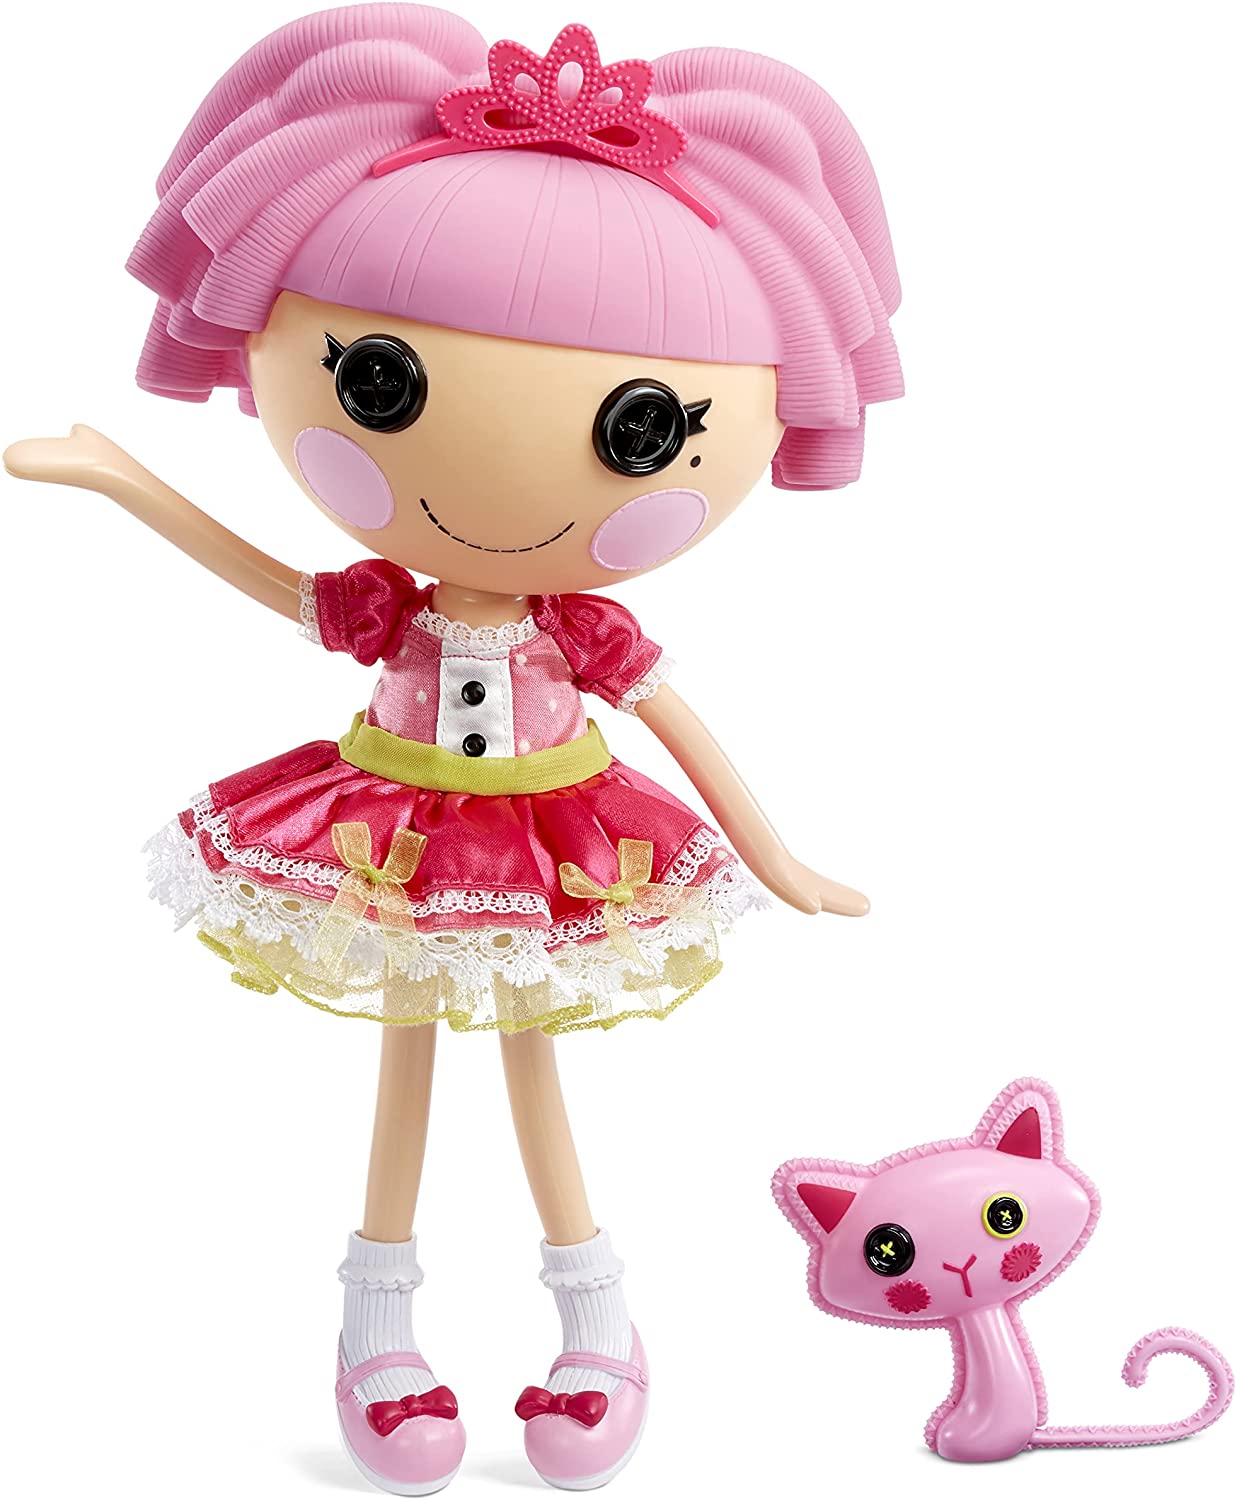 13" Lalaloopsy Princess Doll Playset (Jewel Sparkles & Pet Persian Cat) $9.90 + FS w/ Amazon Prime or FS on $25+